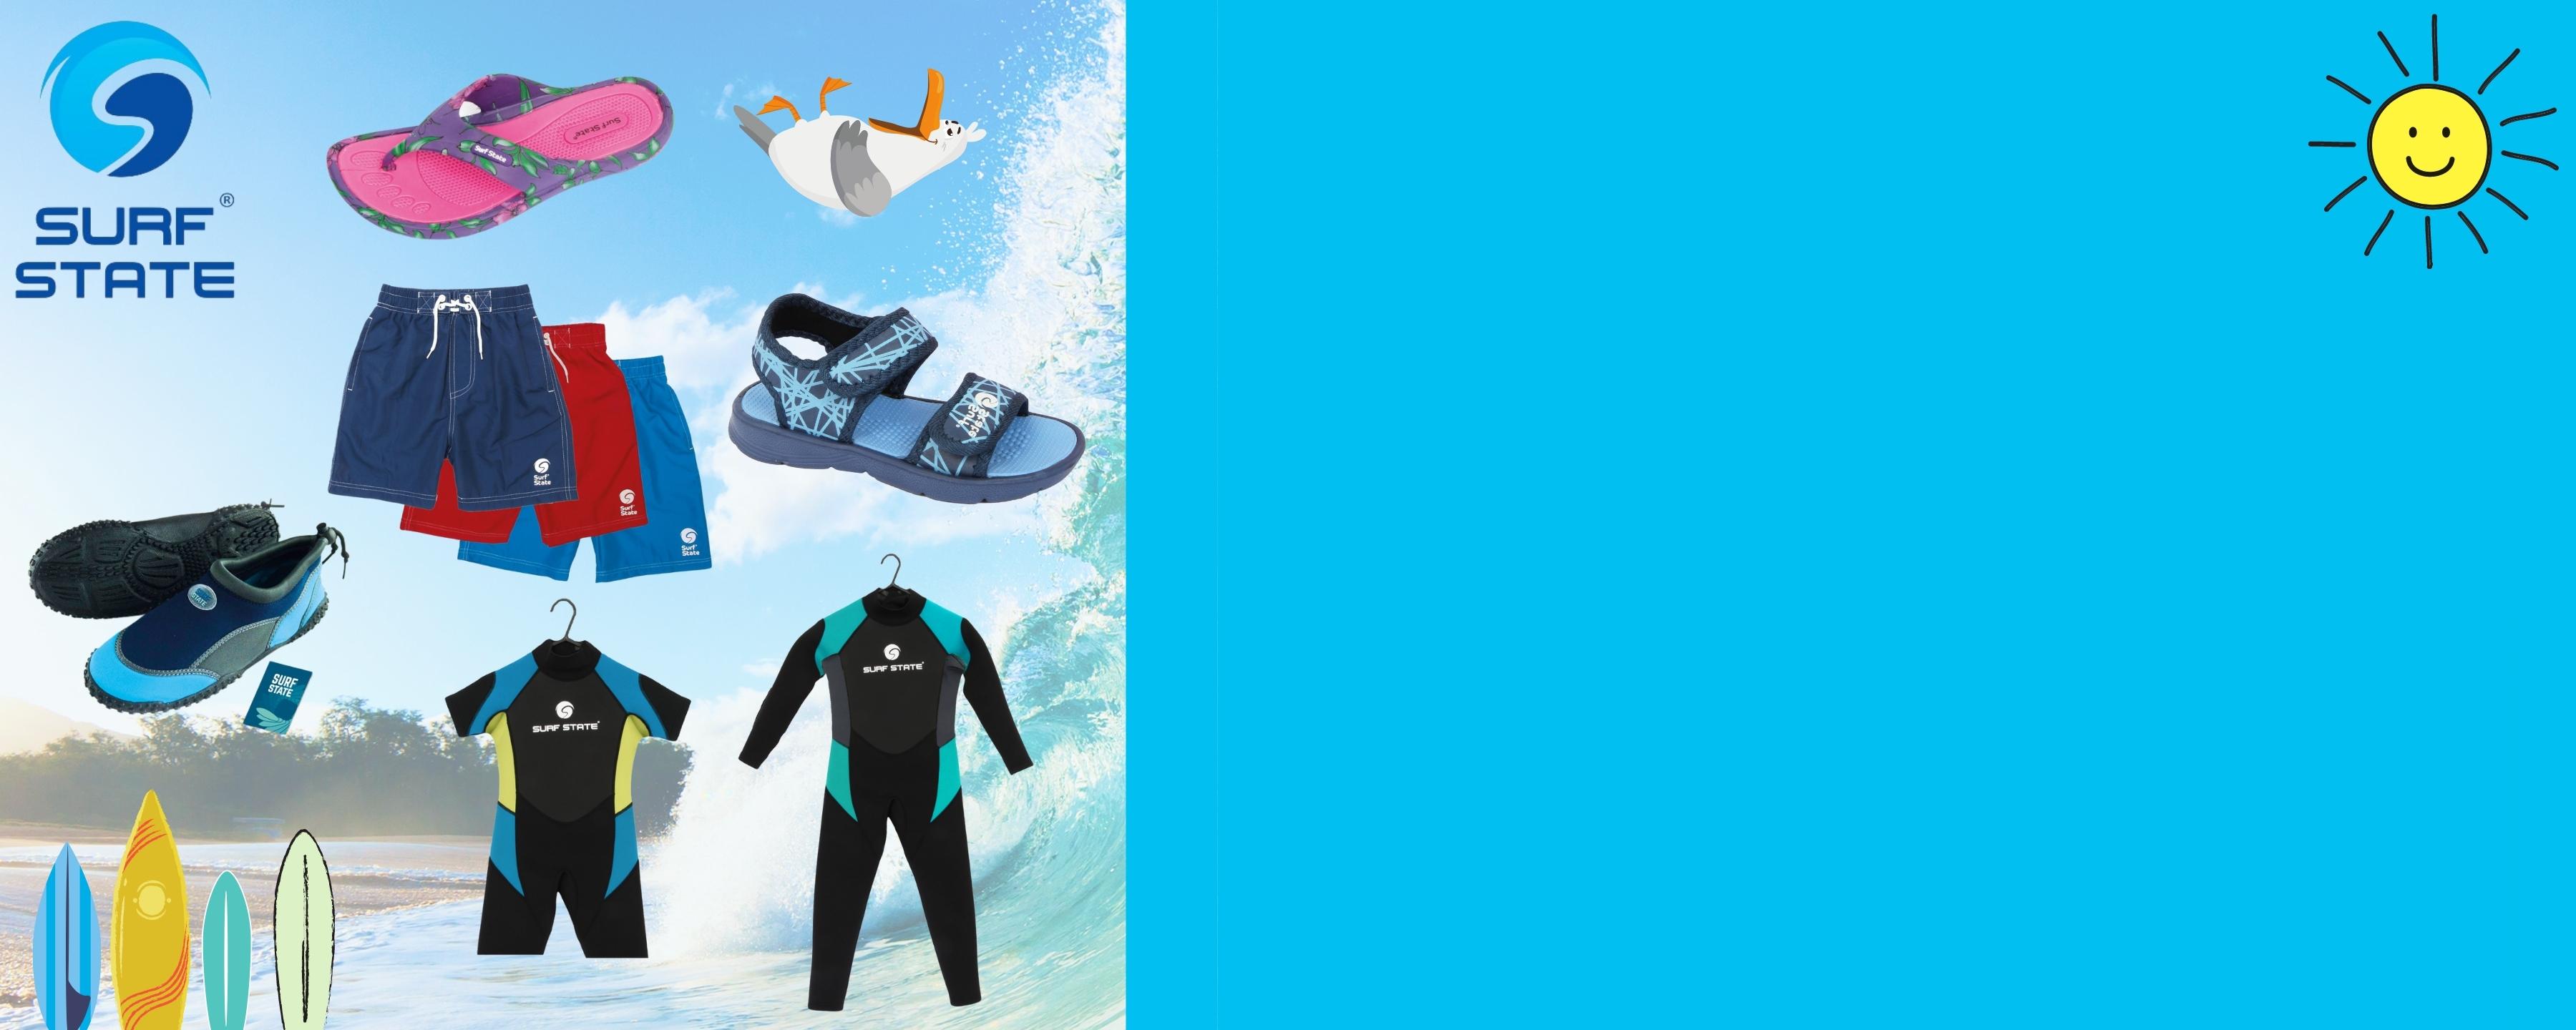 SURF STATE® SHORTS, SHOES & WETSUITS - IN STOCK!